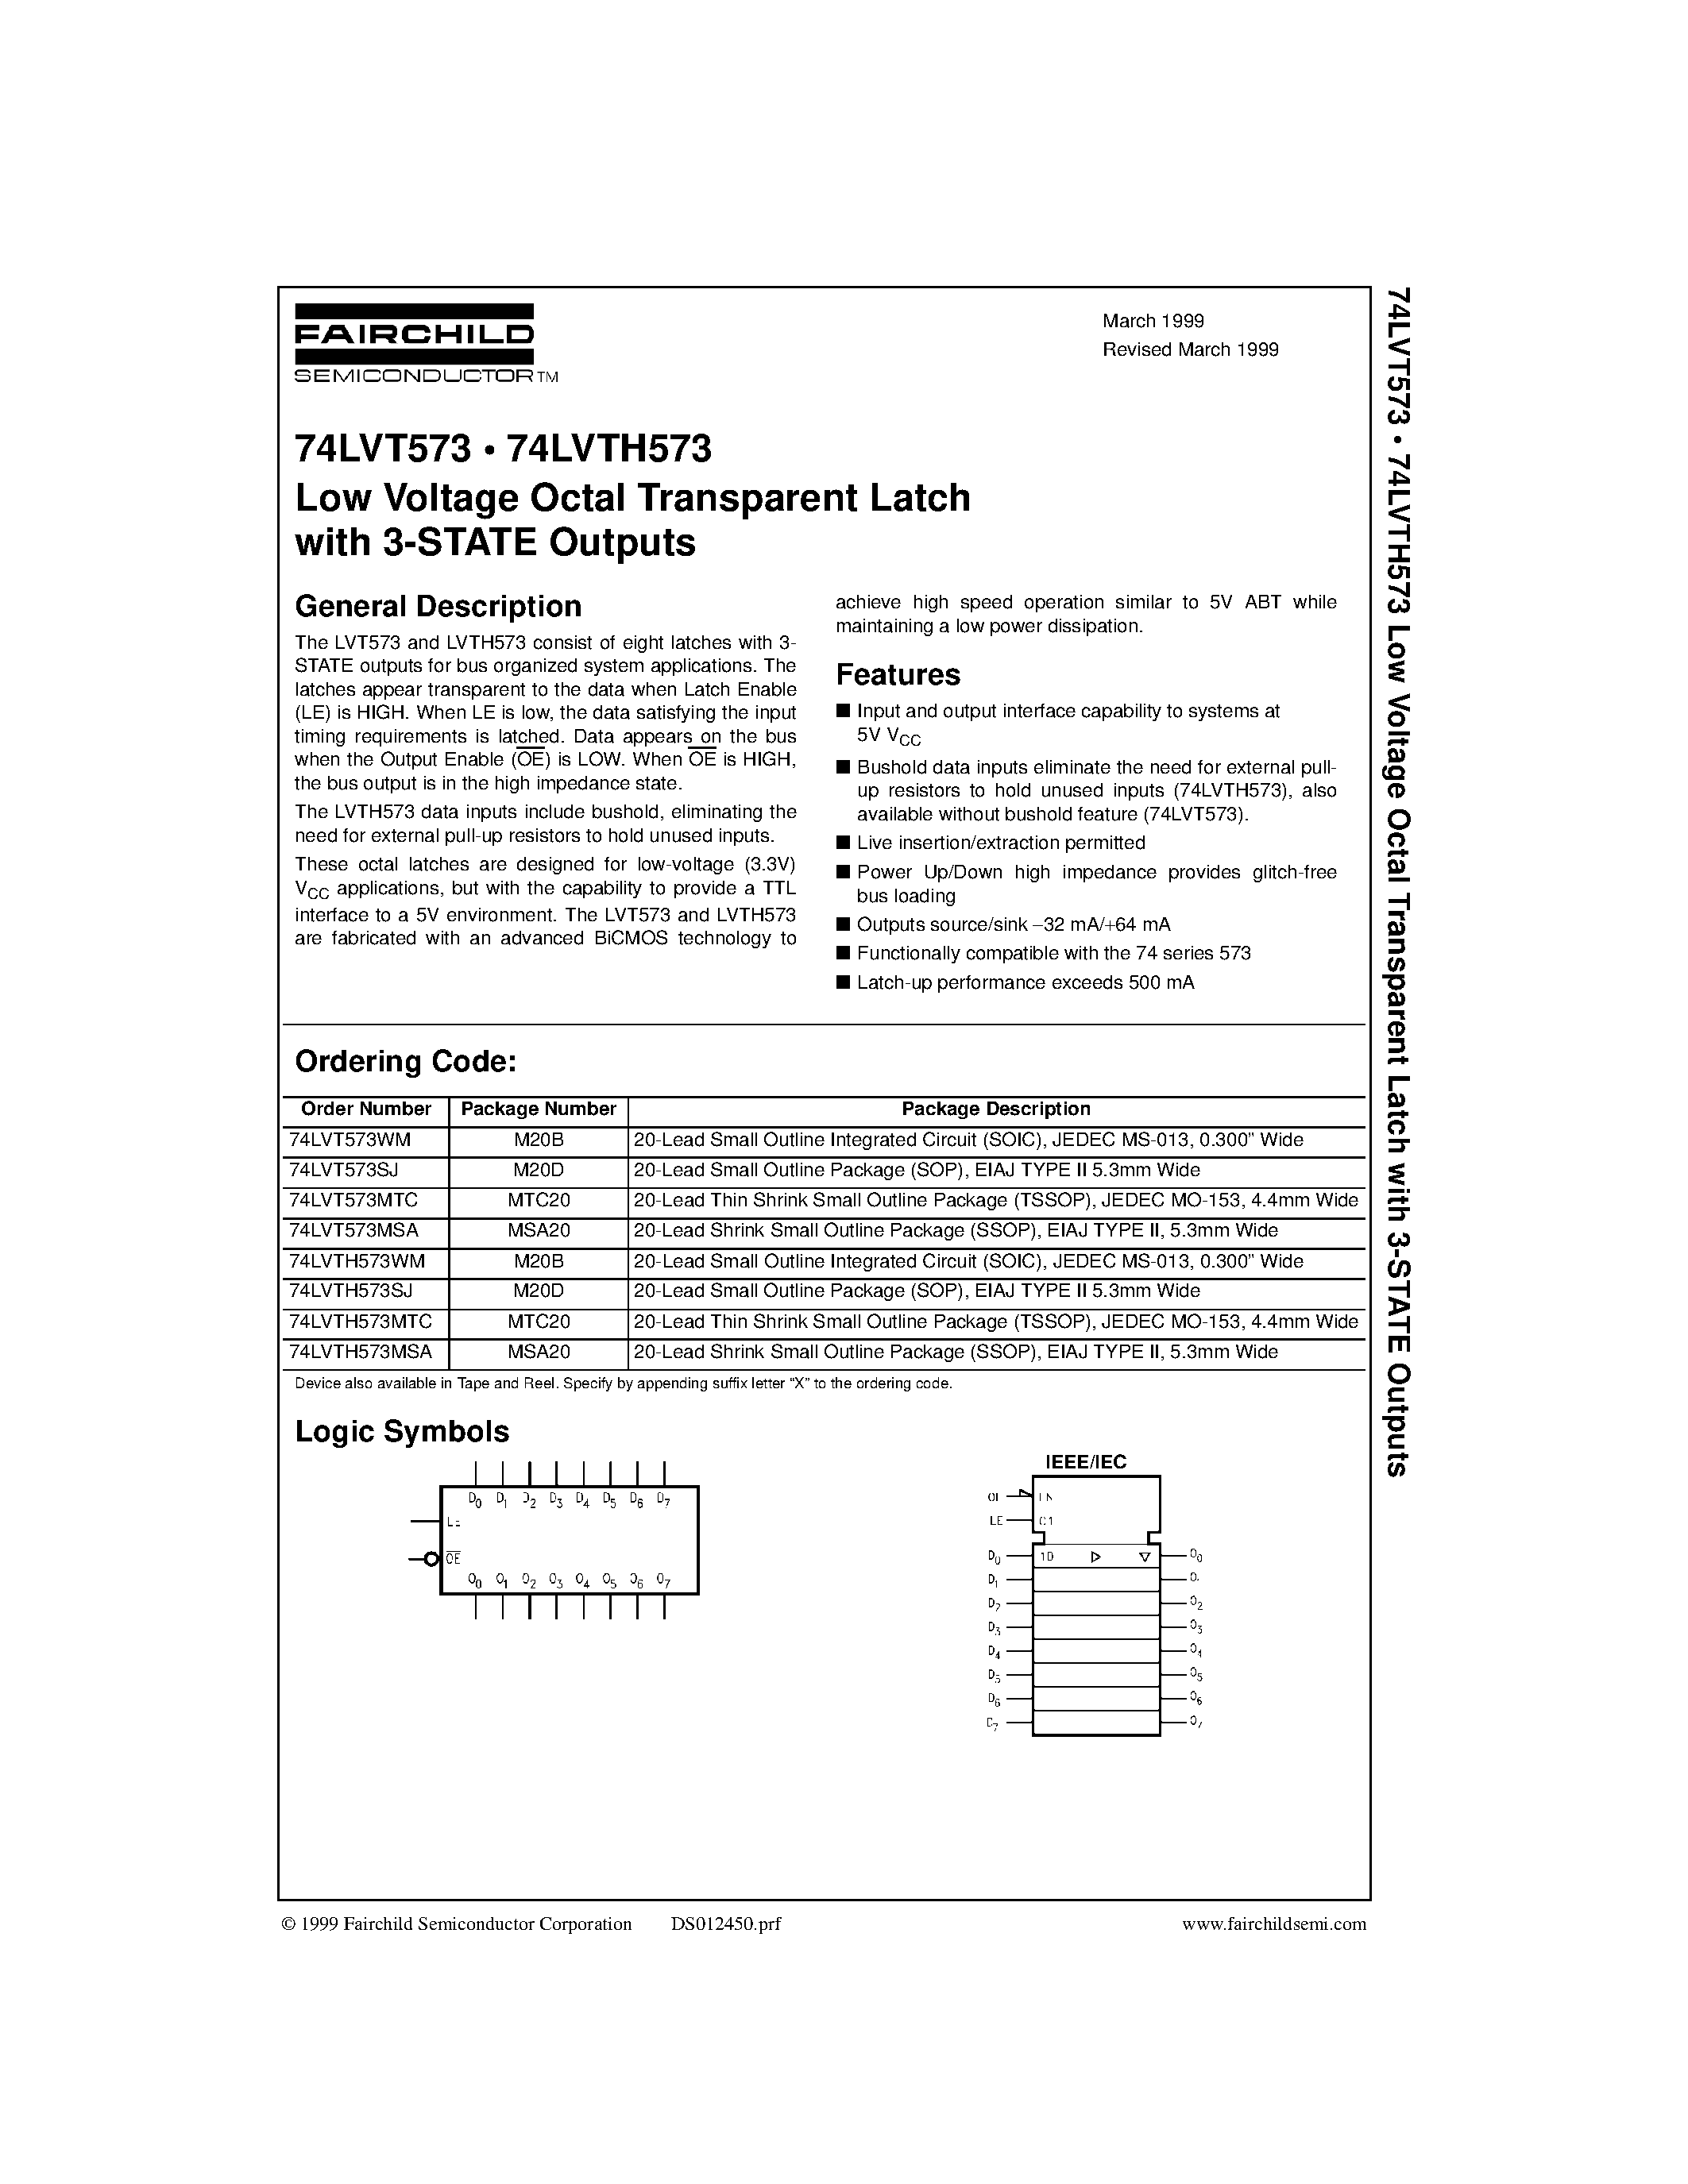 Datasheet 74LVT573 - Low Voltage Octal Transparent Latch with 3-STATE Outputs page 1